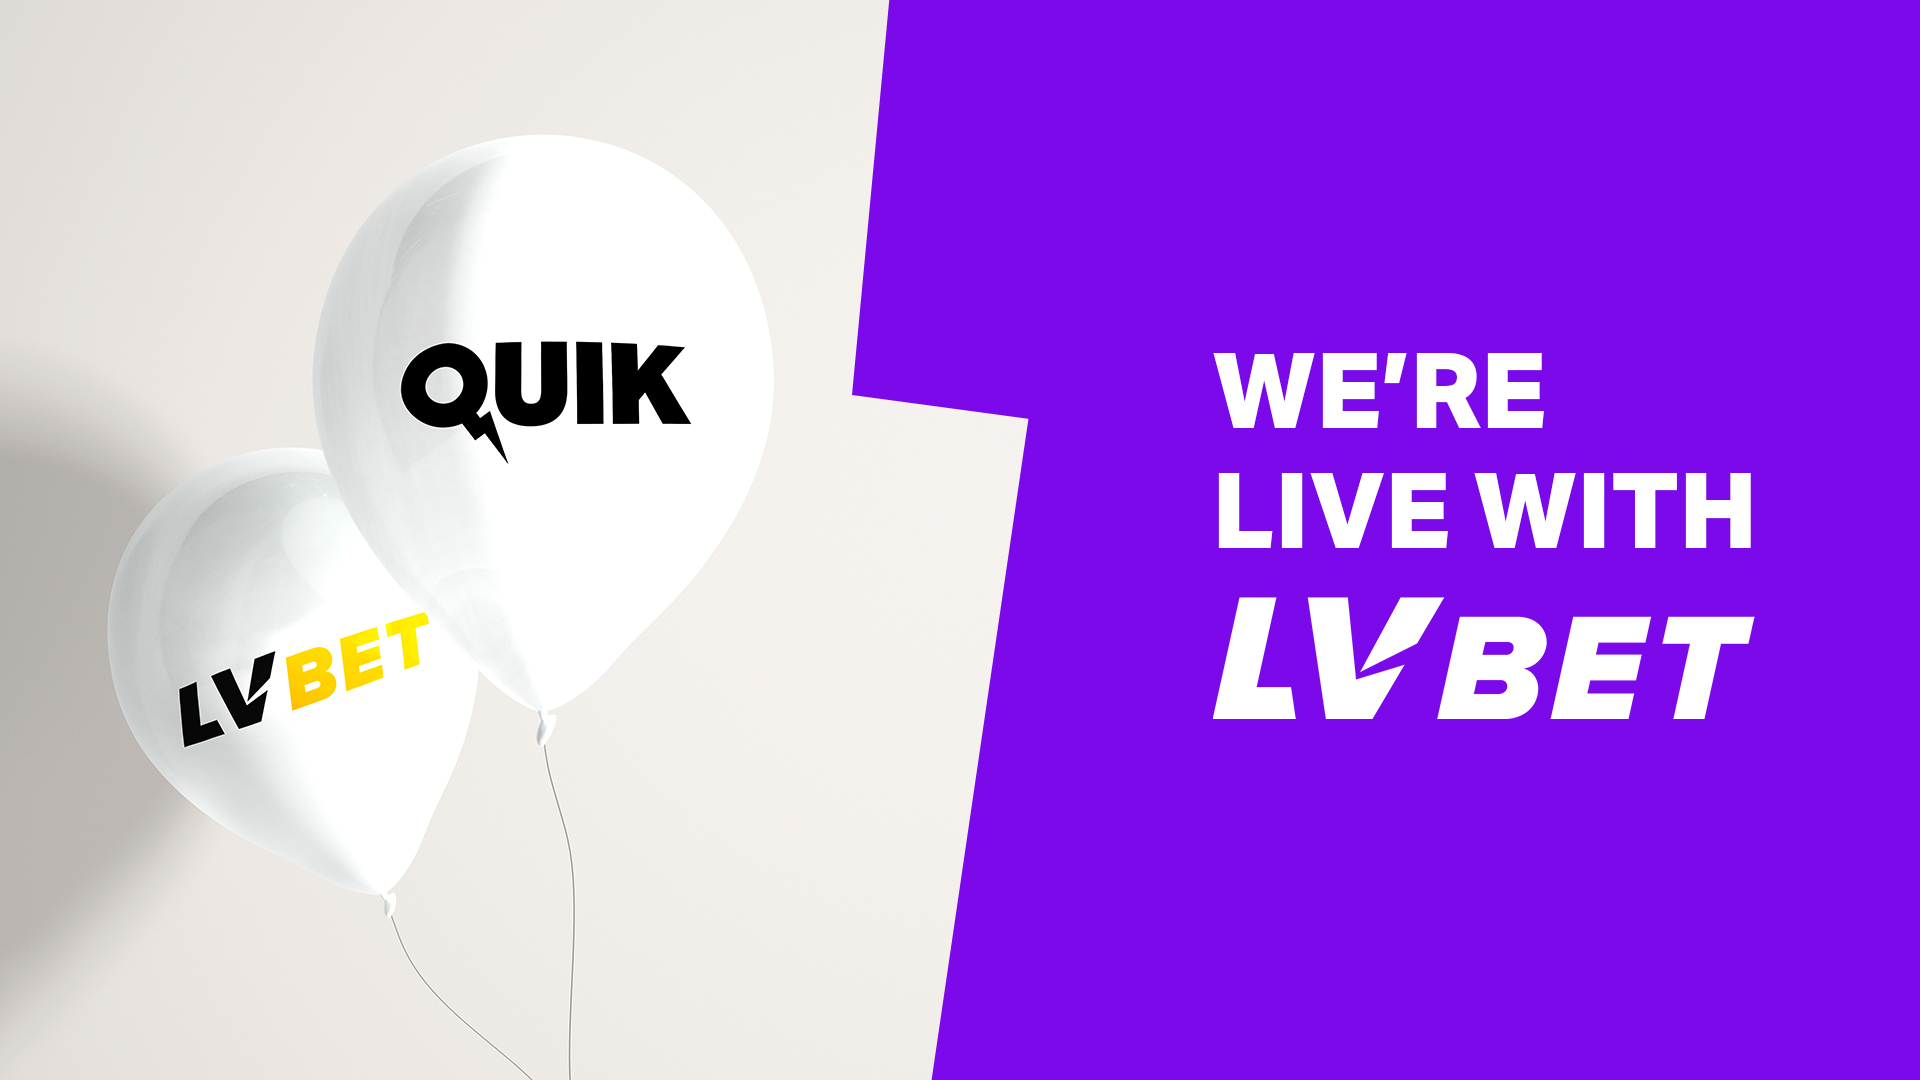 LV BET players can now play QUIK's portfolio of Unique Live Games